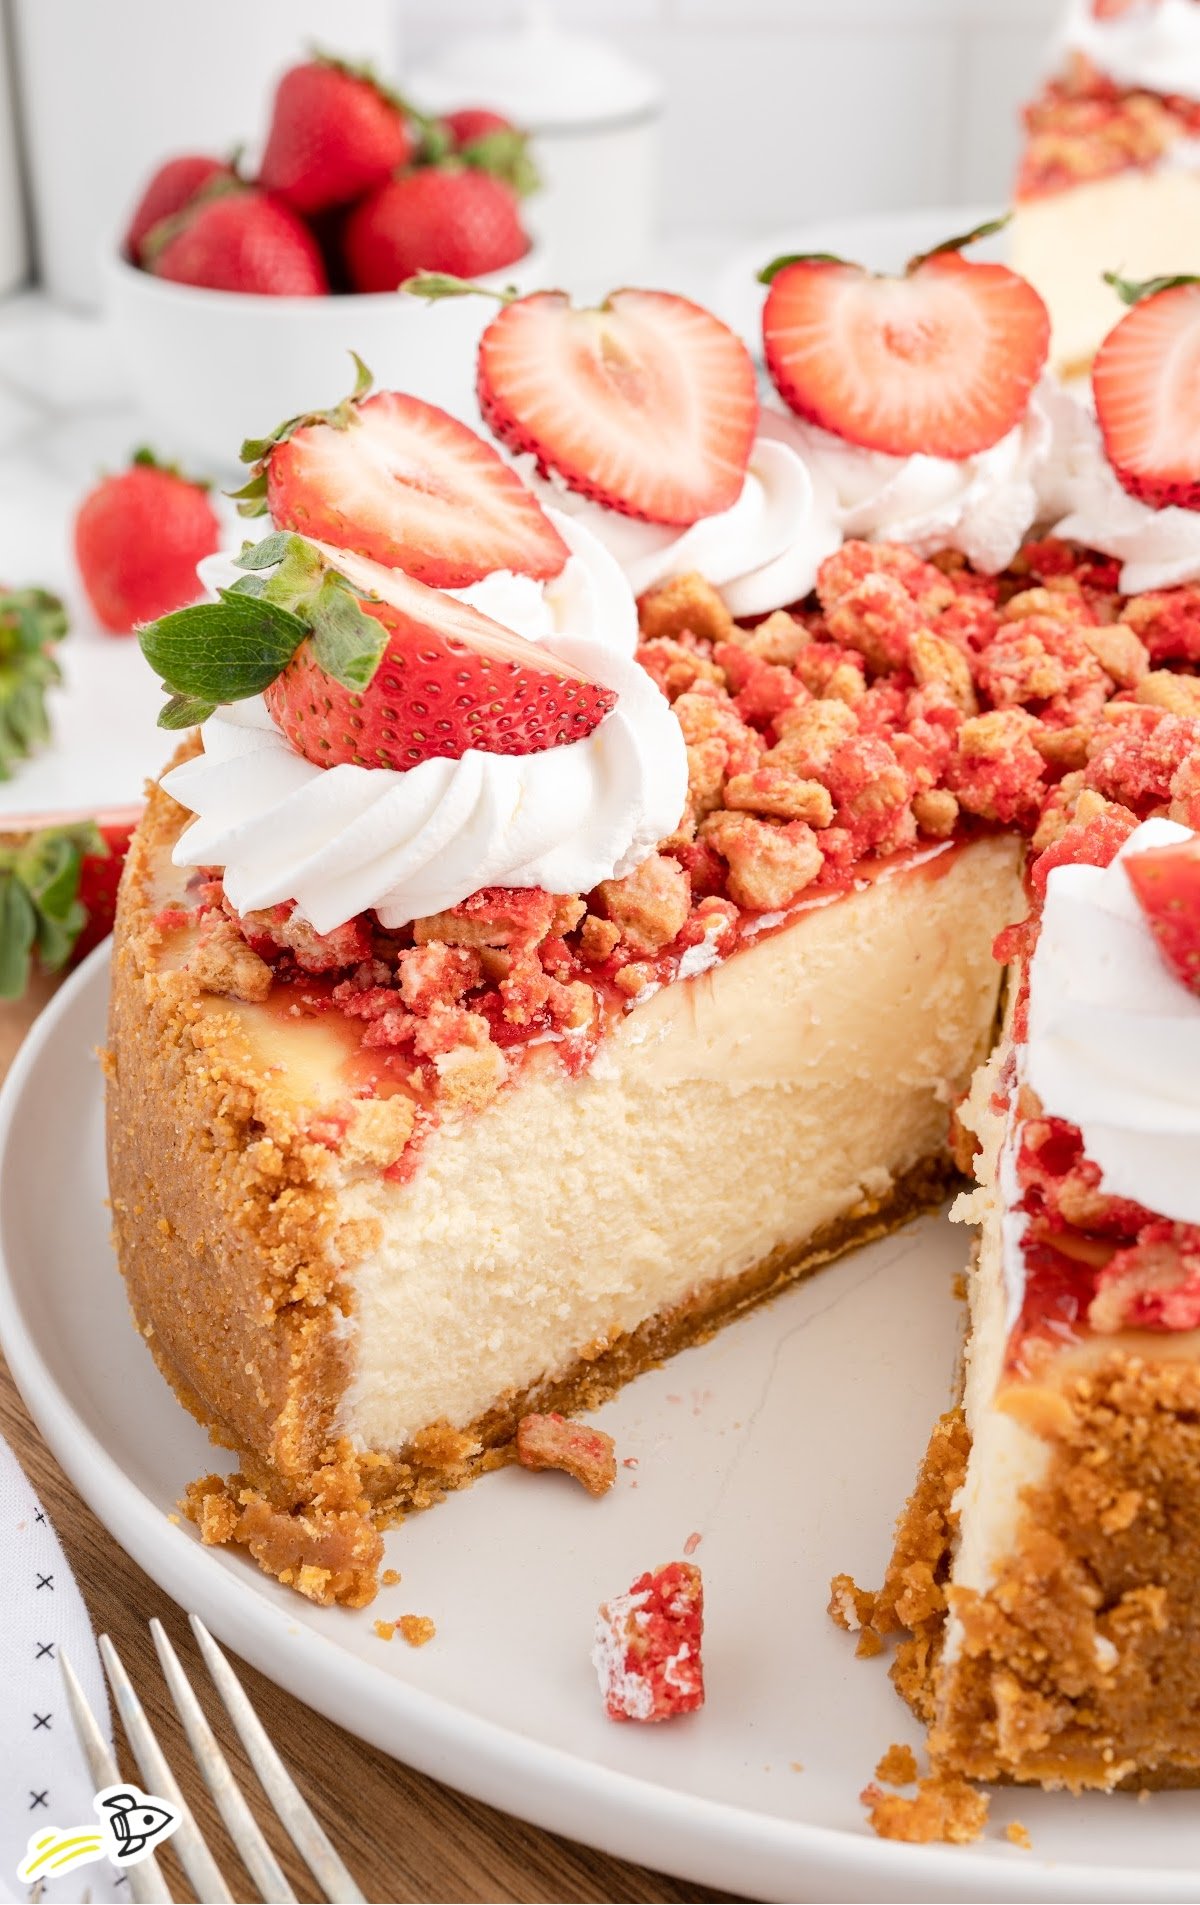 sliced strawberry crunch cheesecake with whipped cream and fresh berries